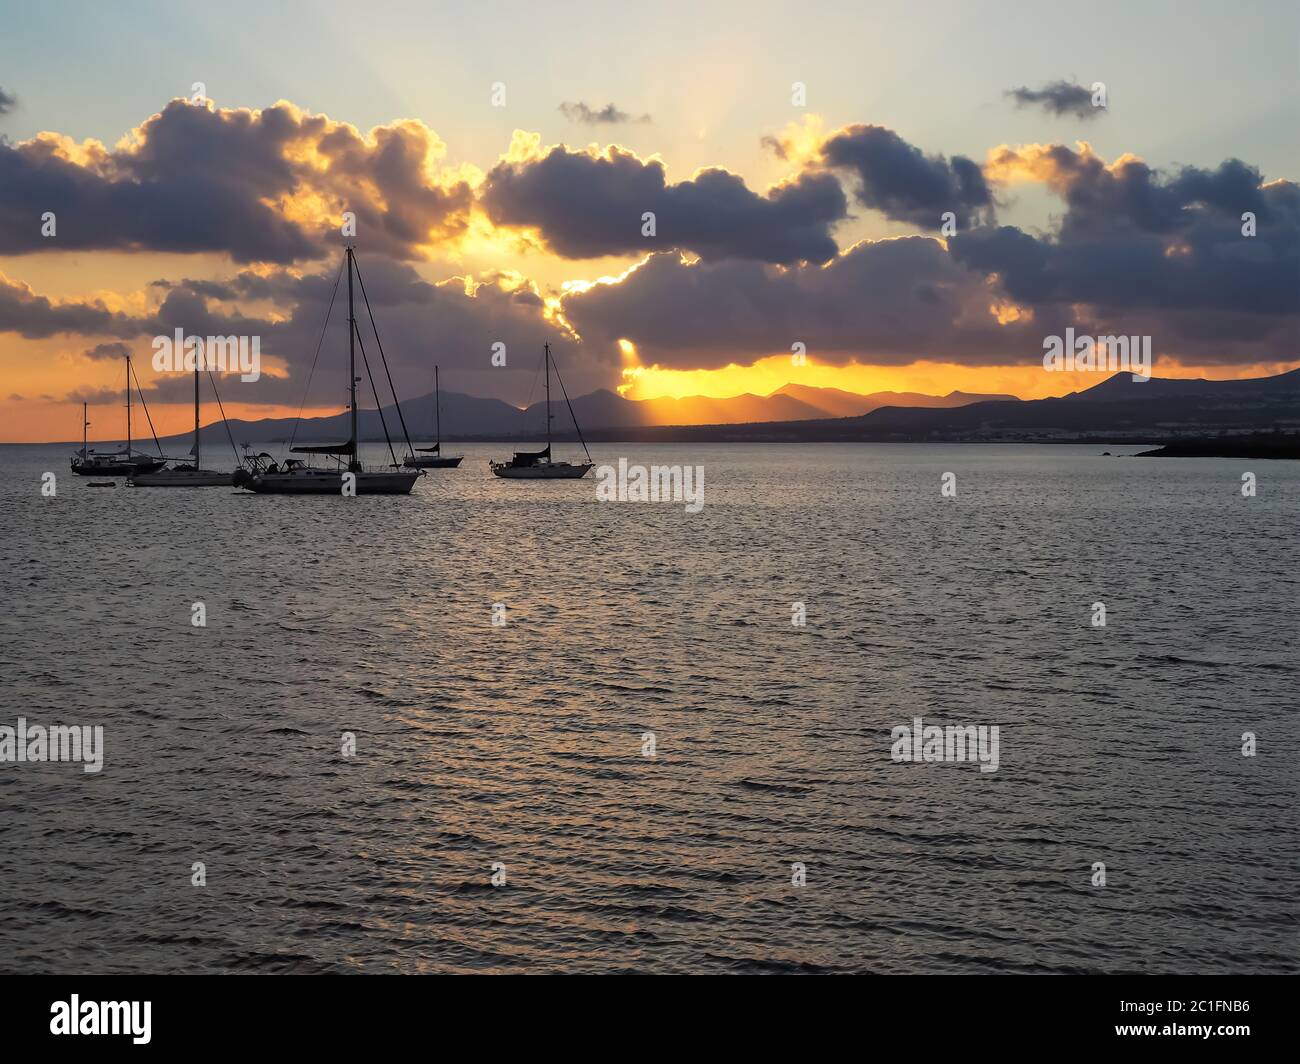 Peaceful evening scene with sailing boats on the ocean at sunset at Arrecife in Lanzarote, the Canary Islands Stock Photo